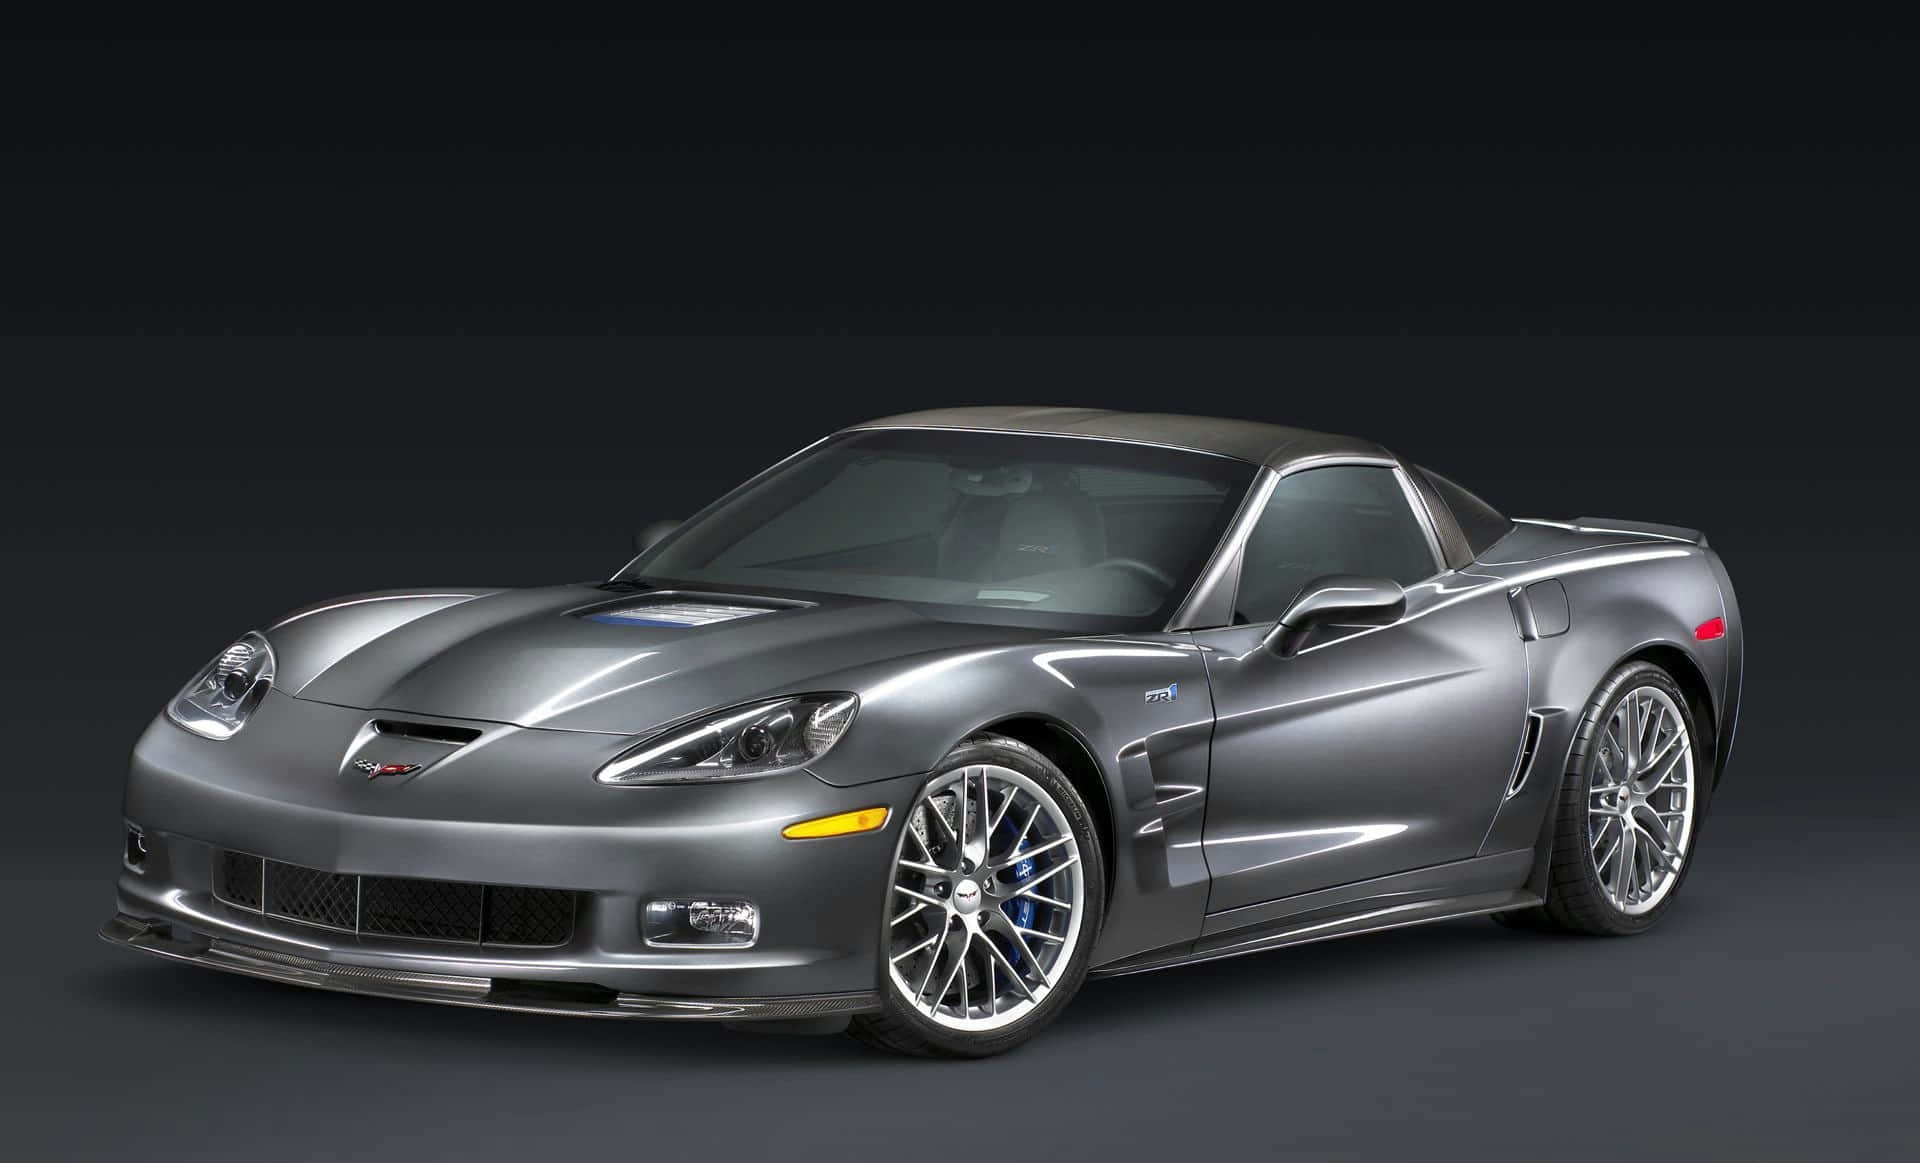 Sleek Chevrolet Corvette Zr1 Shows Off With An Aggressive Look Wallpaper